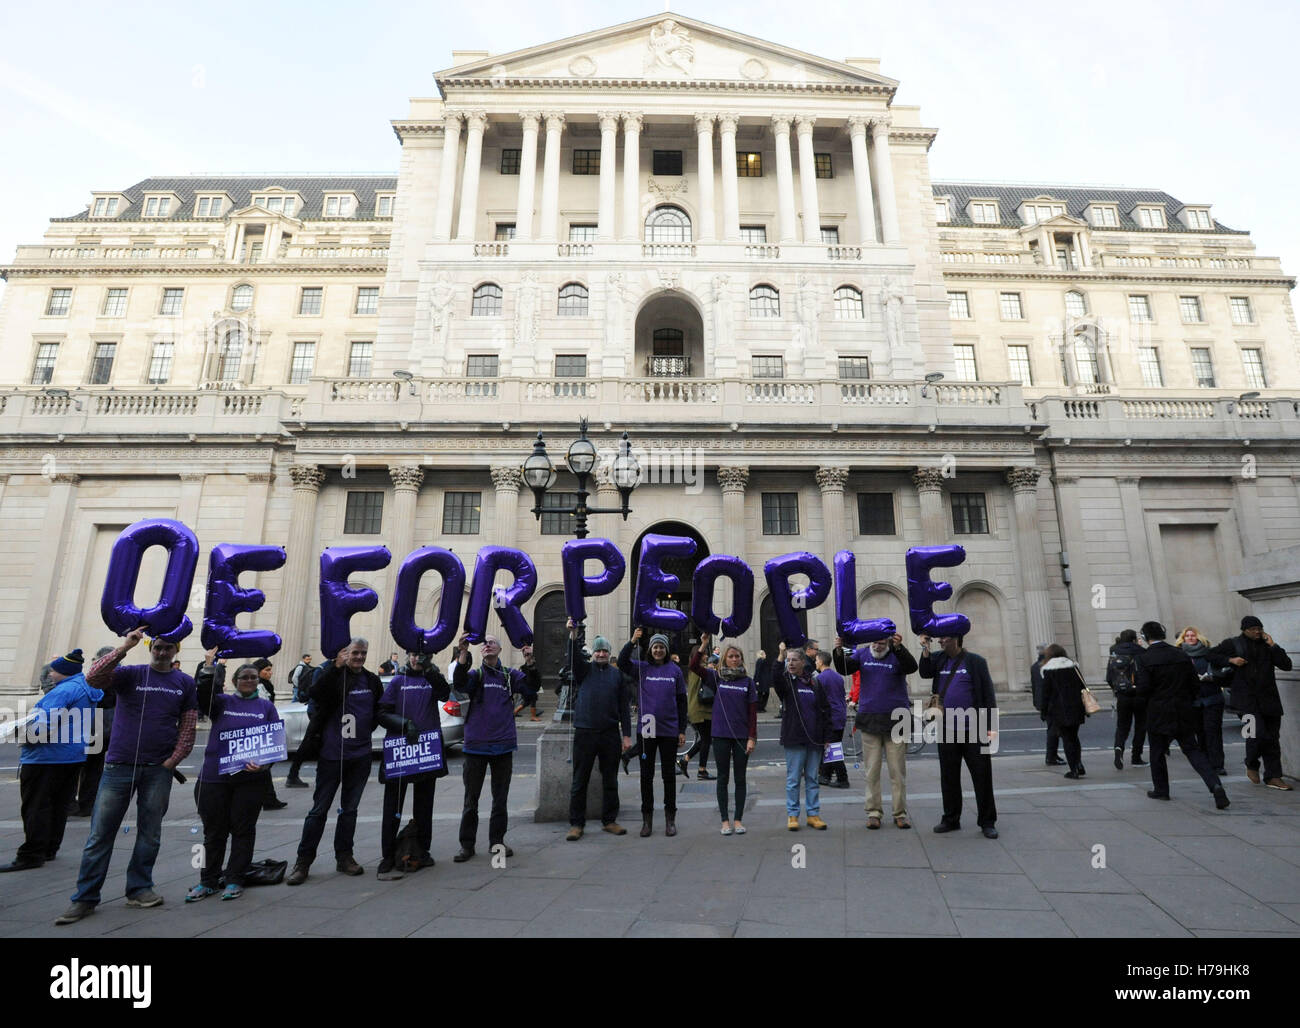 Campaigners hold up helium balloons outside the Bank of England, London, calling on the bank to replace its quantitative easing programme with QE for People, highlighting the fact that foreign-owned corporations are benefiting from the Bank's purchases of corporate bonds. Stock Photo